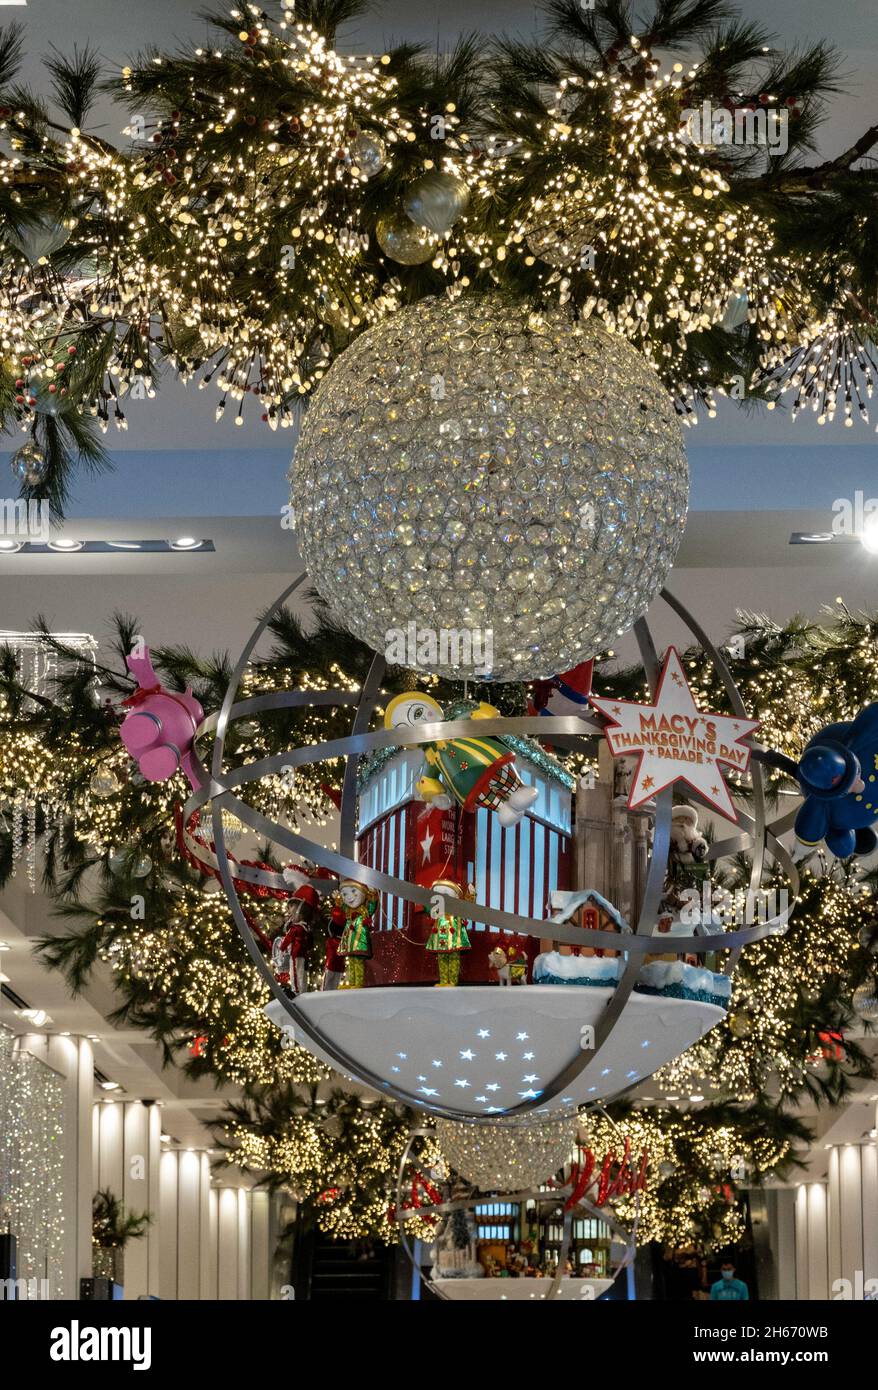 Macy's Department Store, Holiday Decorations, Main Floor, Herald Square,  NYC Stock Photo - Alamy